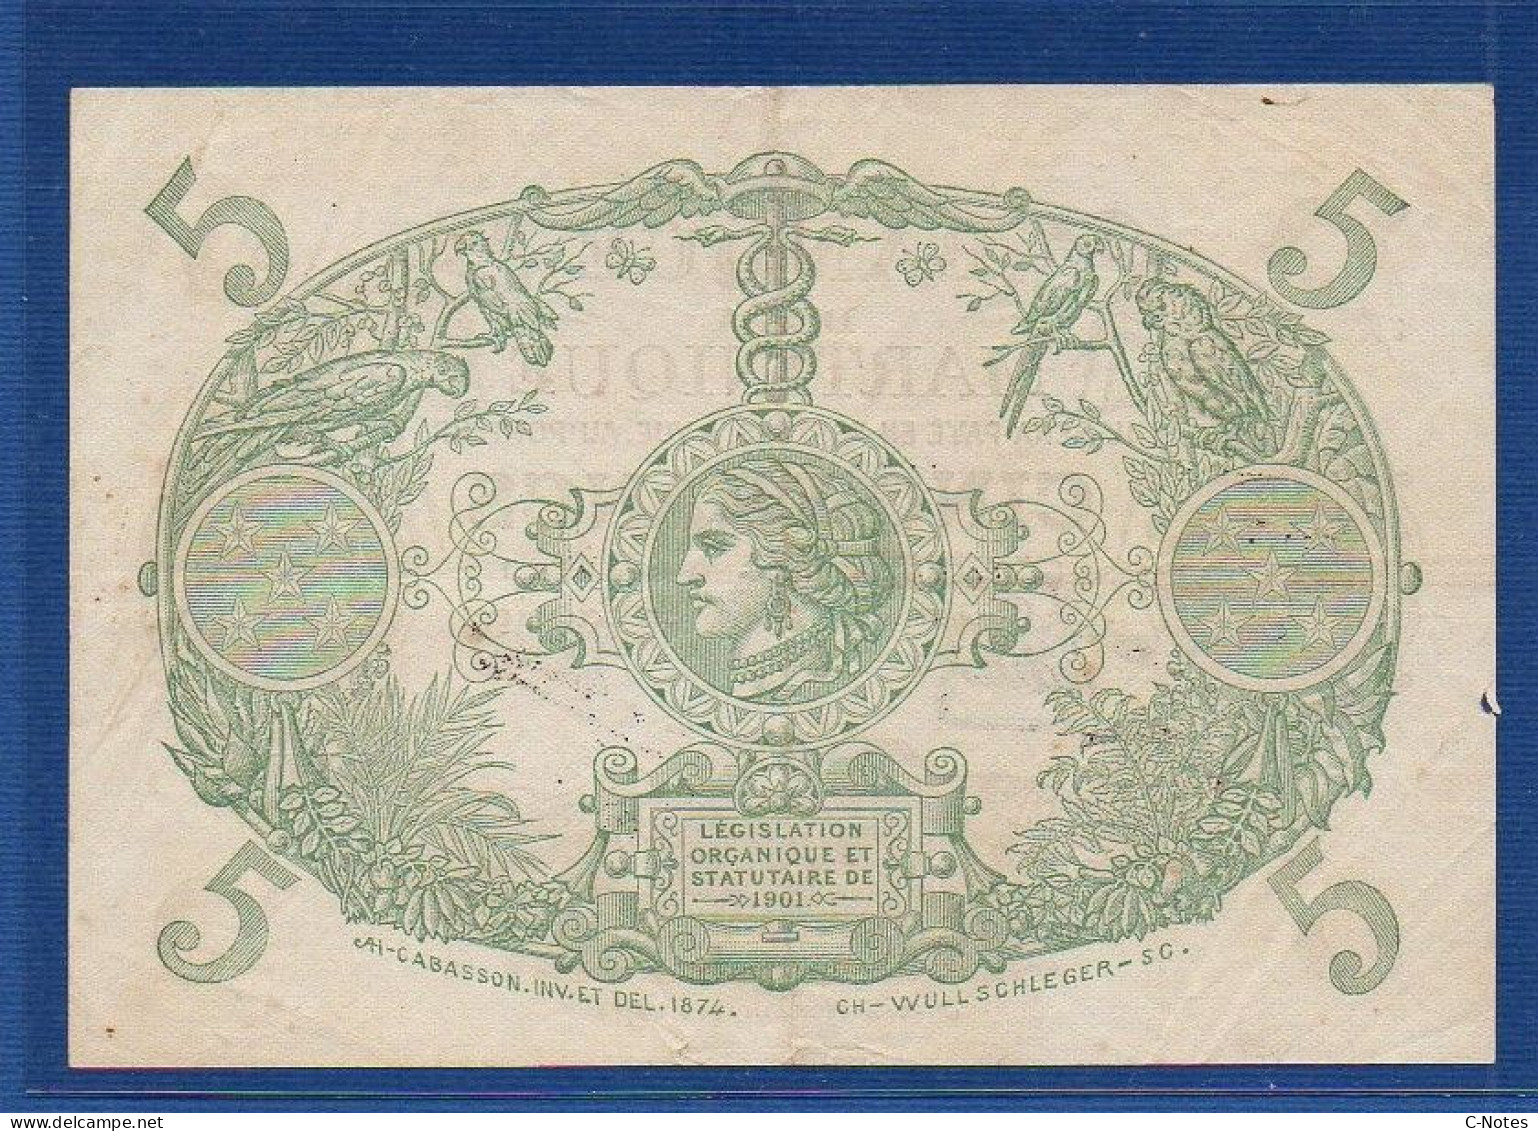 MARTINIQUE - P. 6 (1) – 5 Francs L. 1901 (1934-1945) VF+, S/n  O.283 957 - Other - America